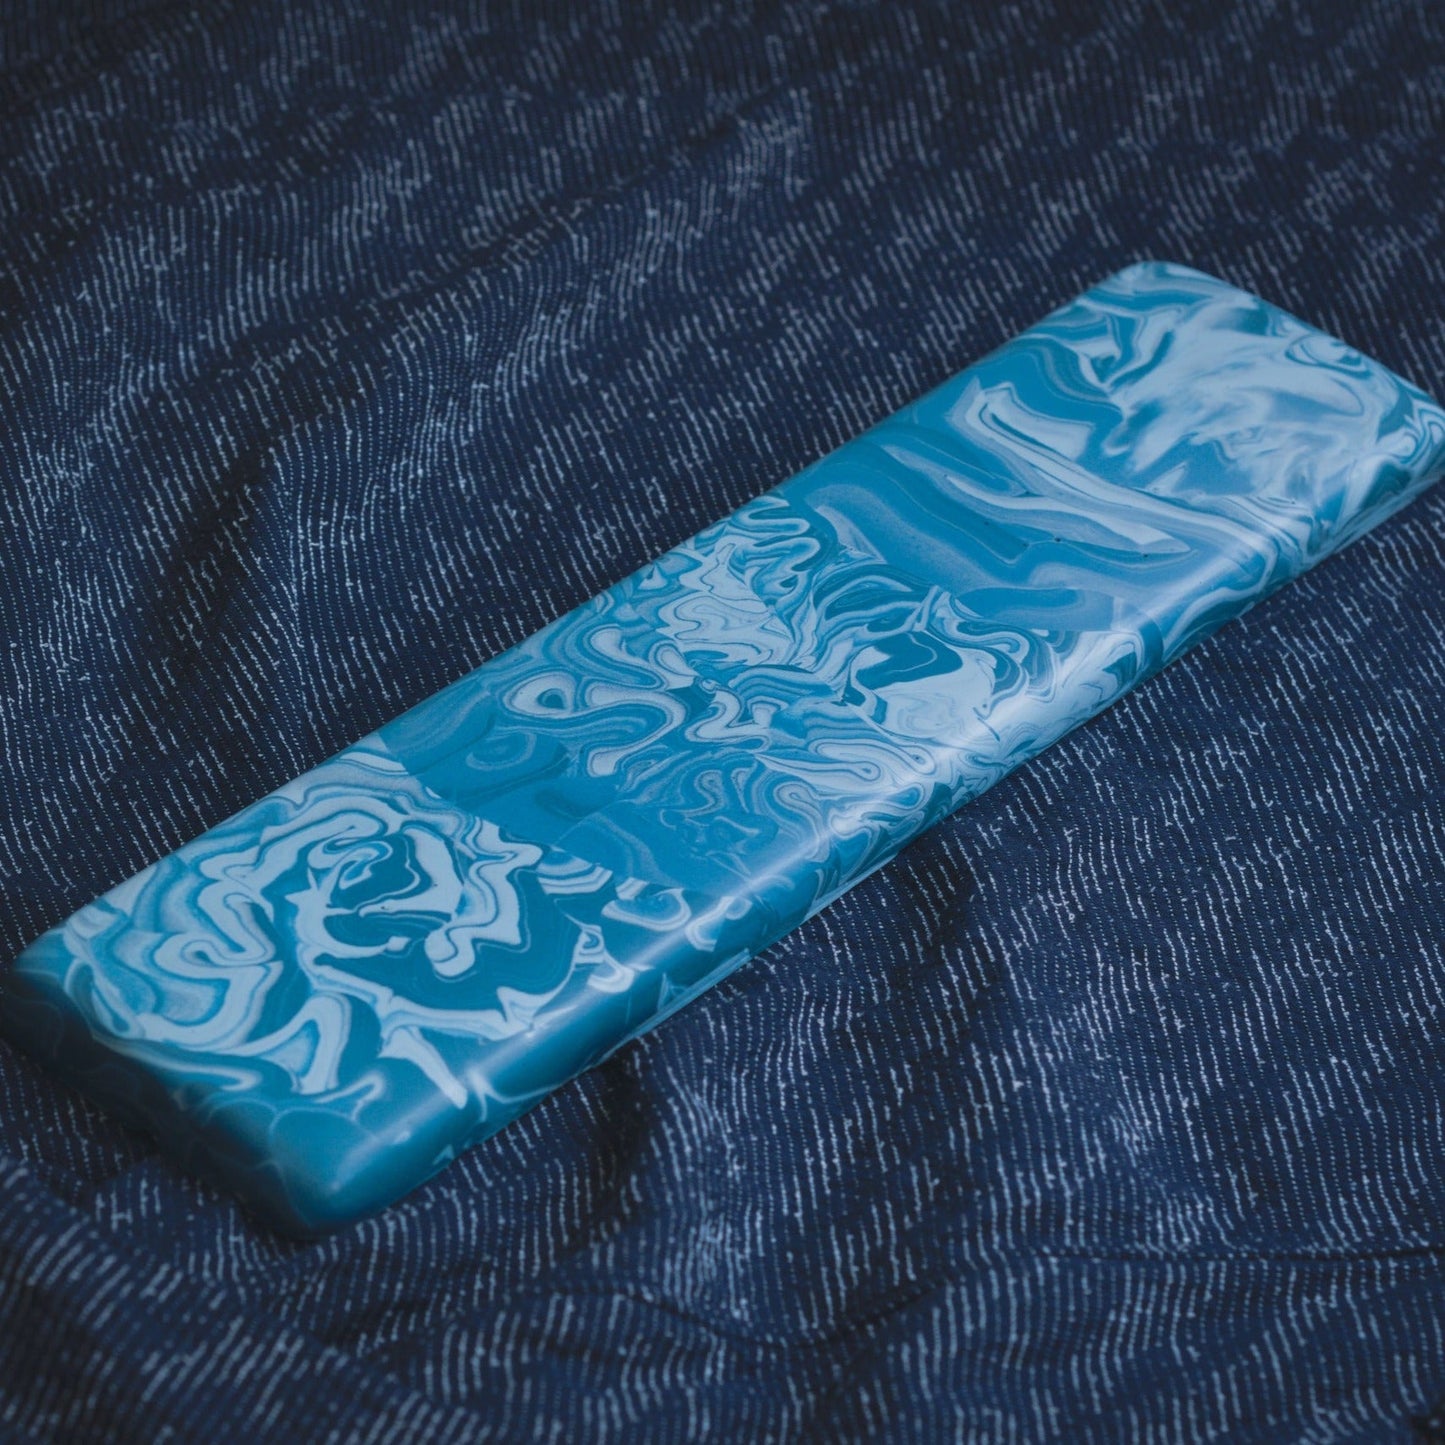 Marbled Wrist rest- Blue Squiggles